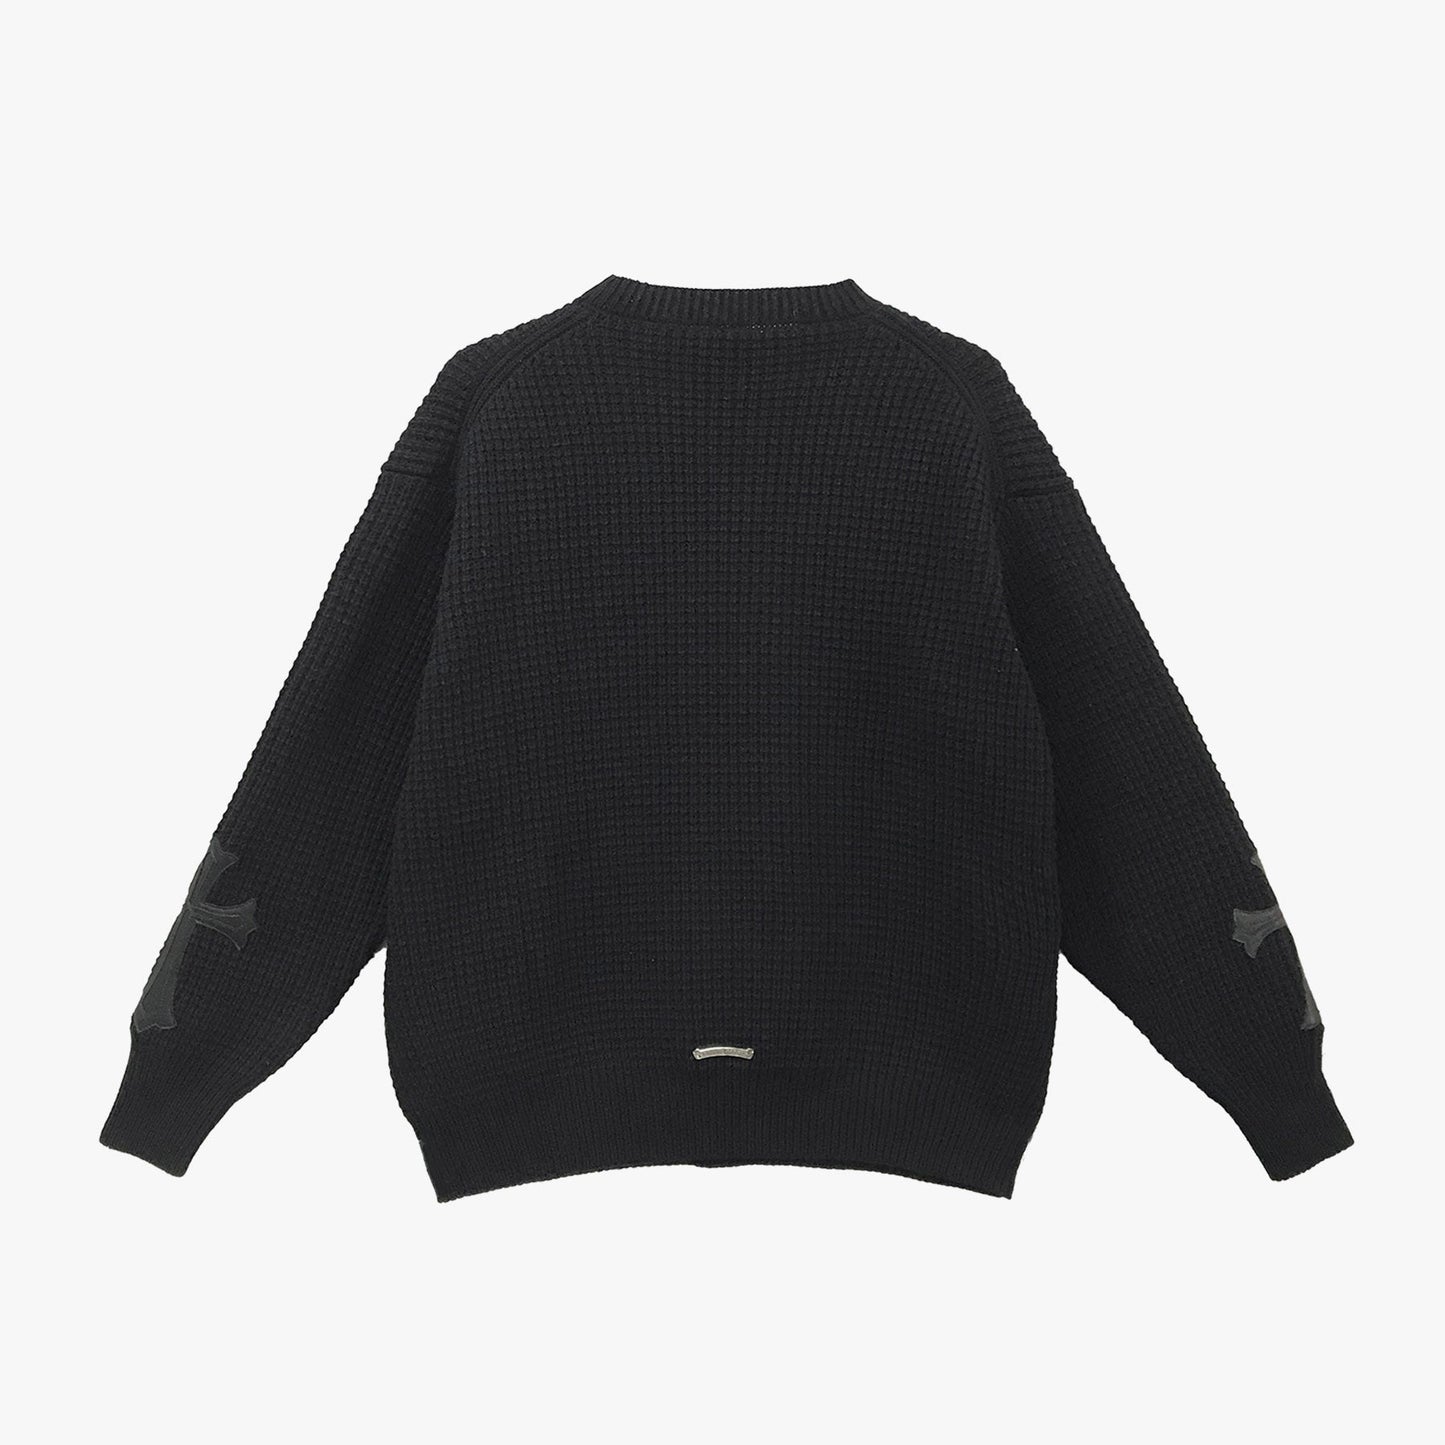 Chrome Hearts Leather Cross Patch Cashmere Sweater - SHENGLI ROAD MARKET